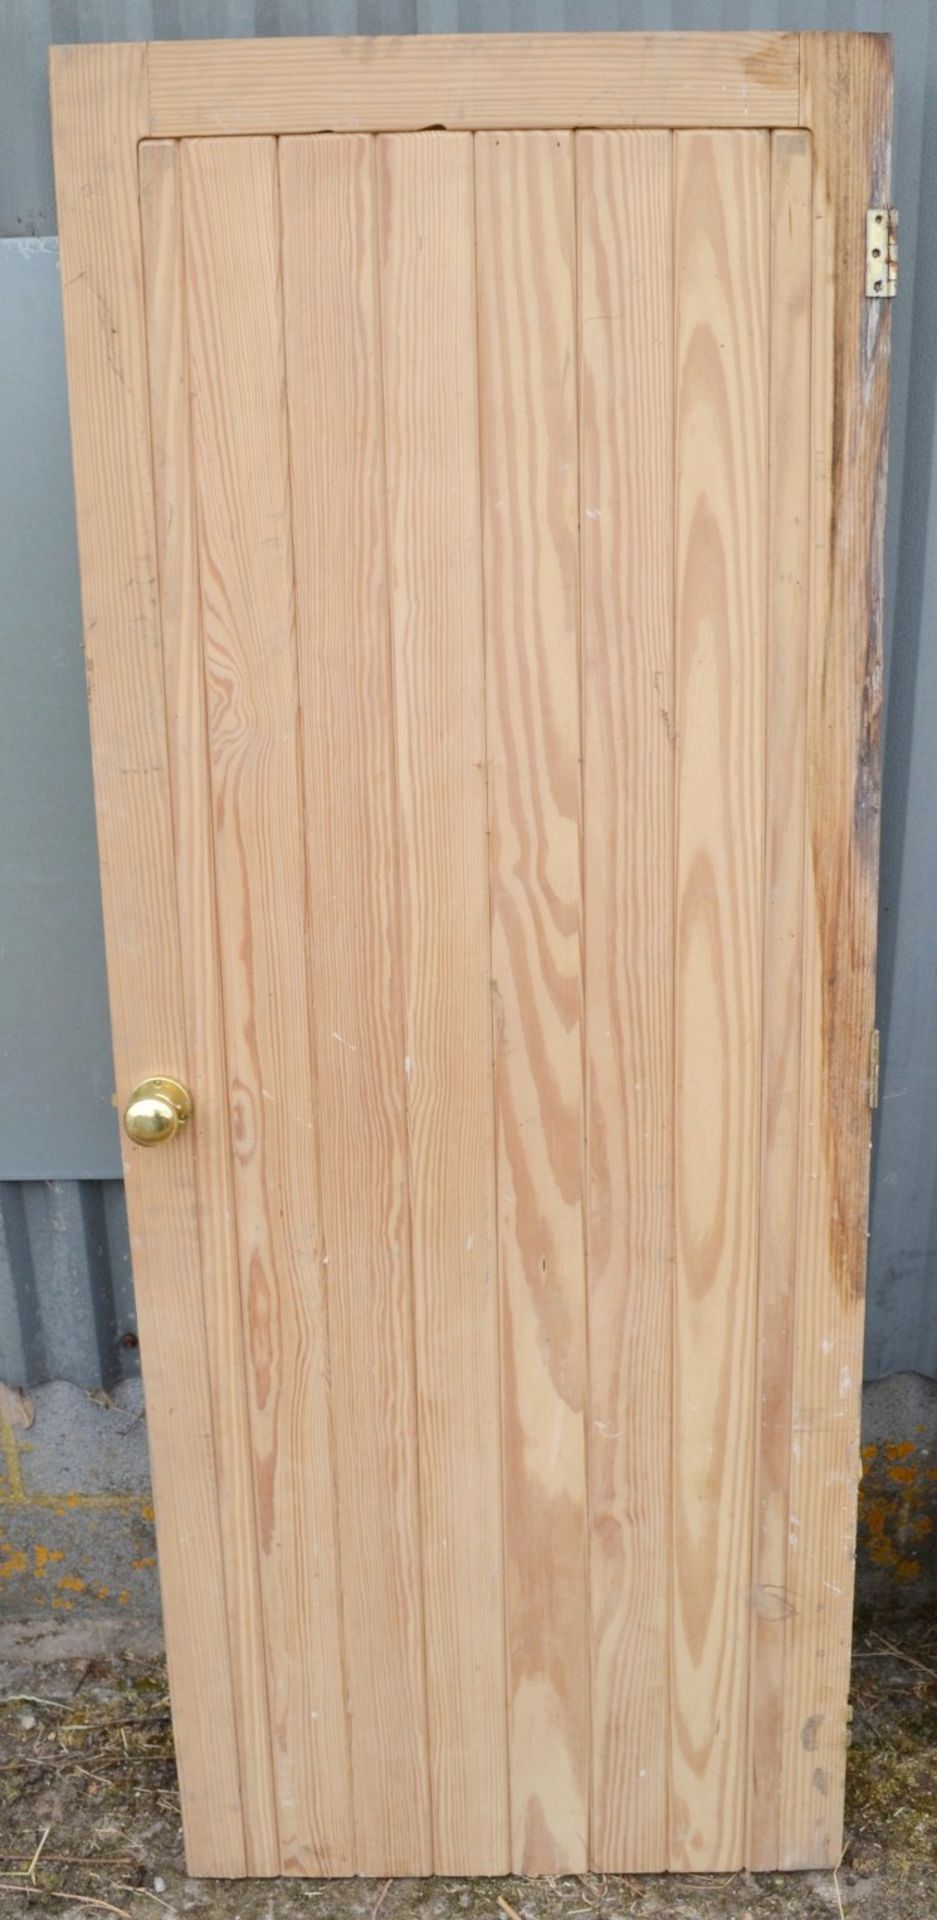 Set Of 4 x Reclaimed Wooden Doors - Taken From A Grade II Listed Property - Image 7 of 8